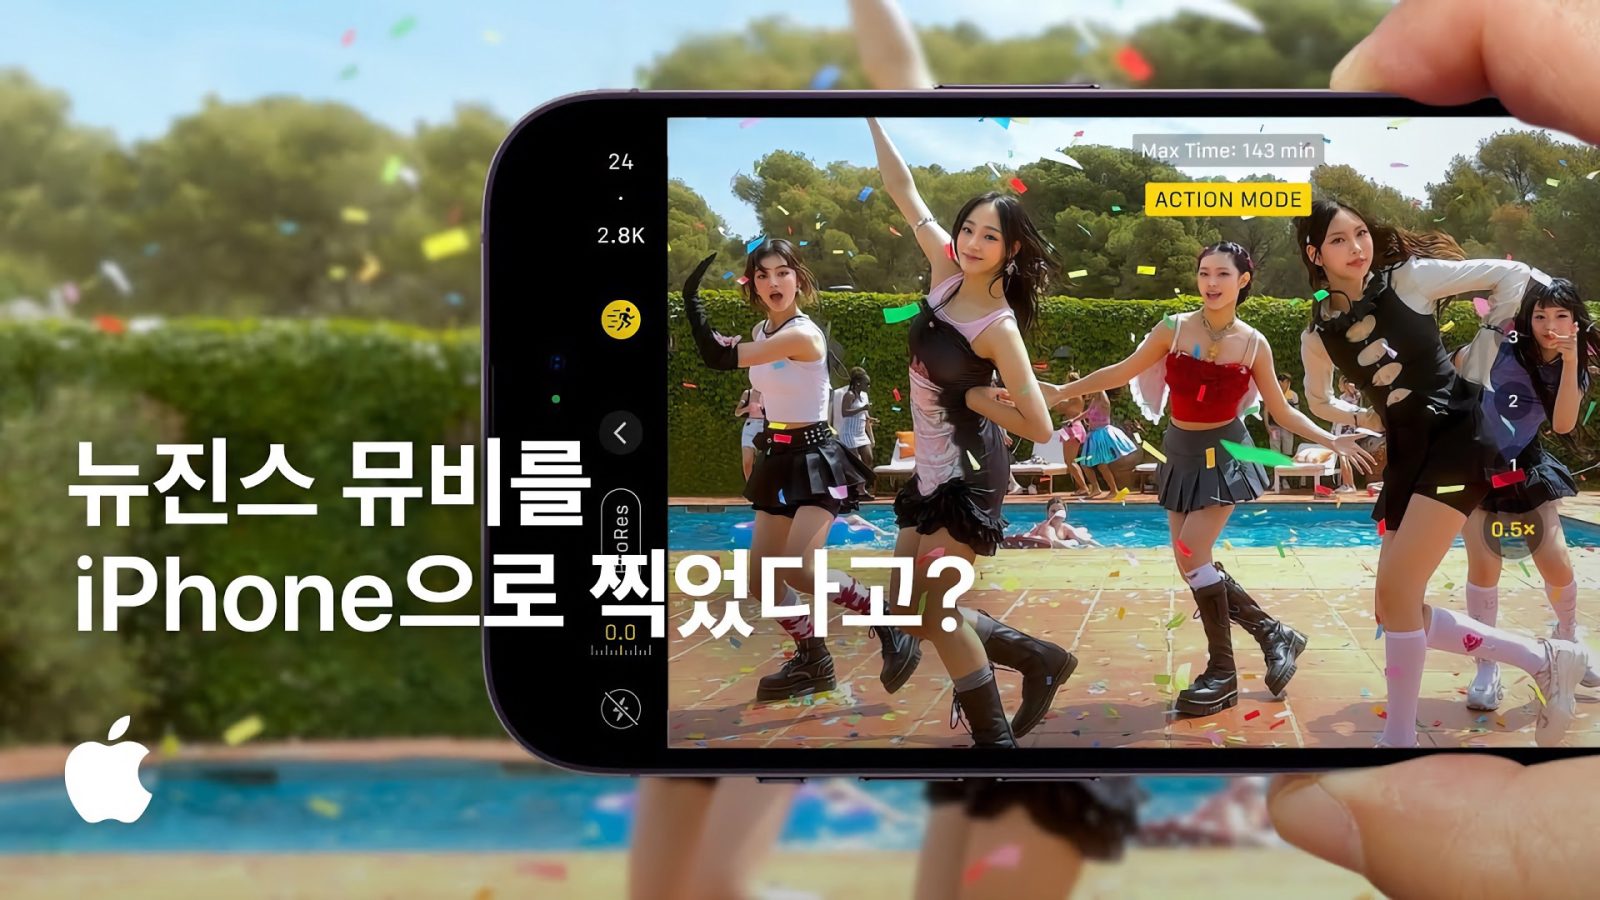 Apple partners with K-pop band NewJeans to shoot music video with iPhone 14 Pro